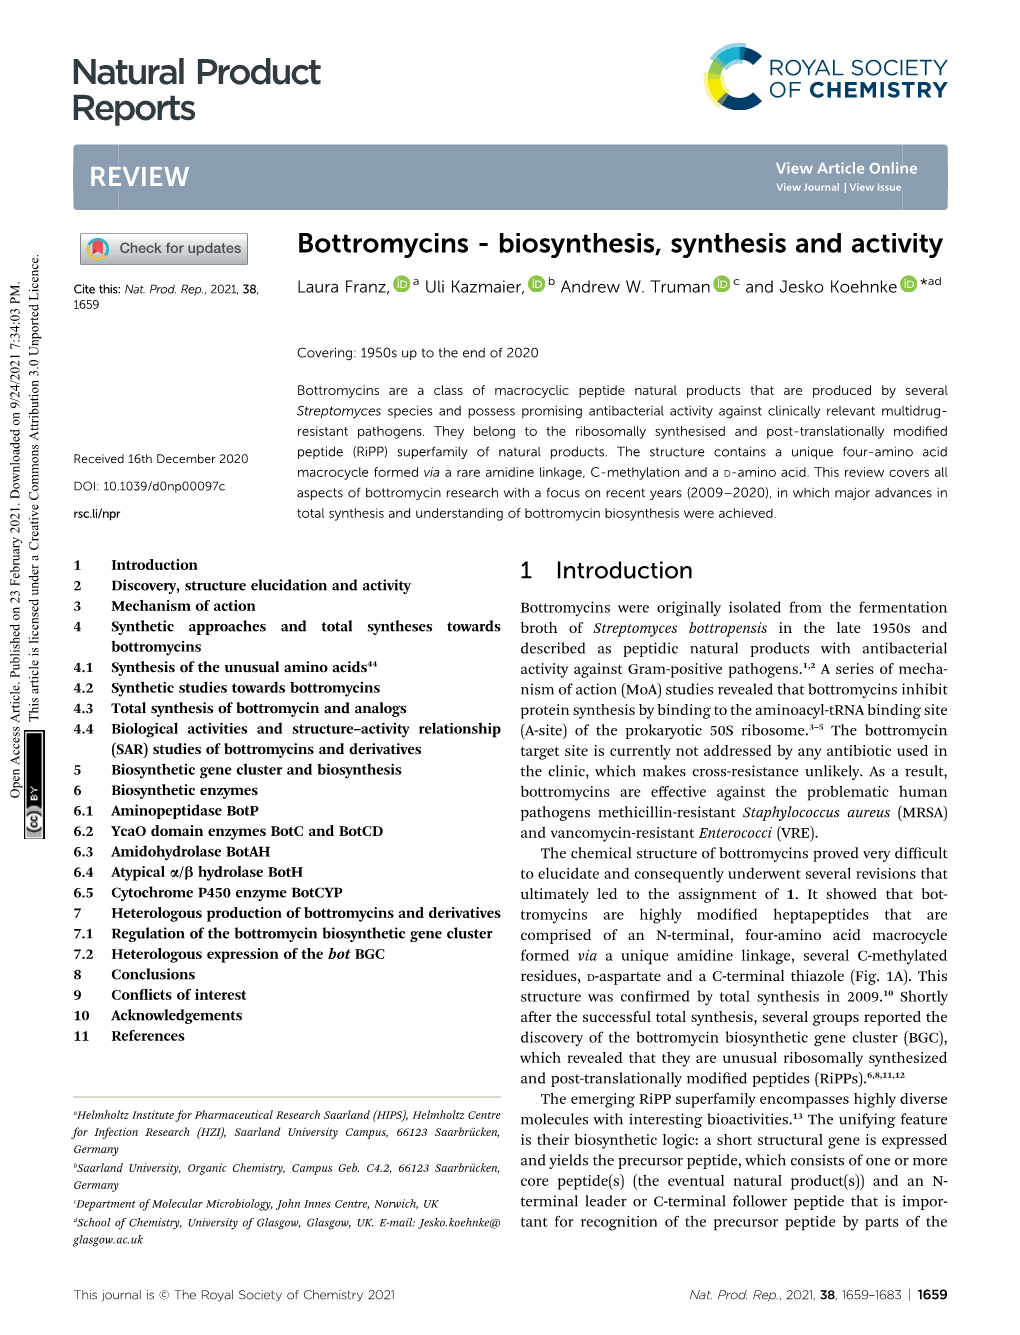 Bottromycins - Biosynthesis, Synthesis and Activity